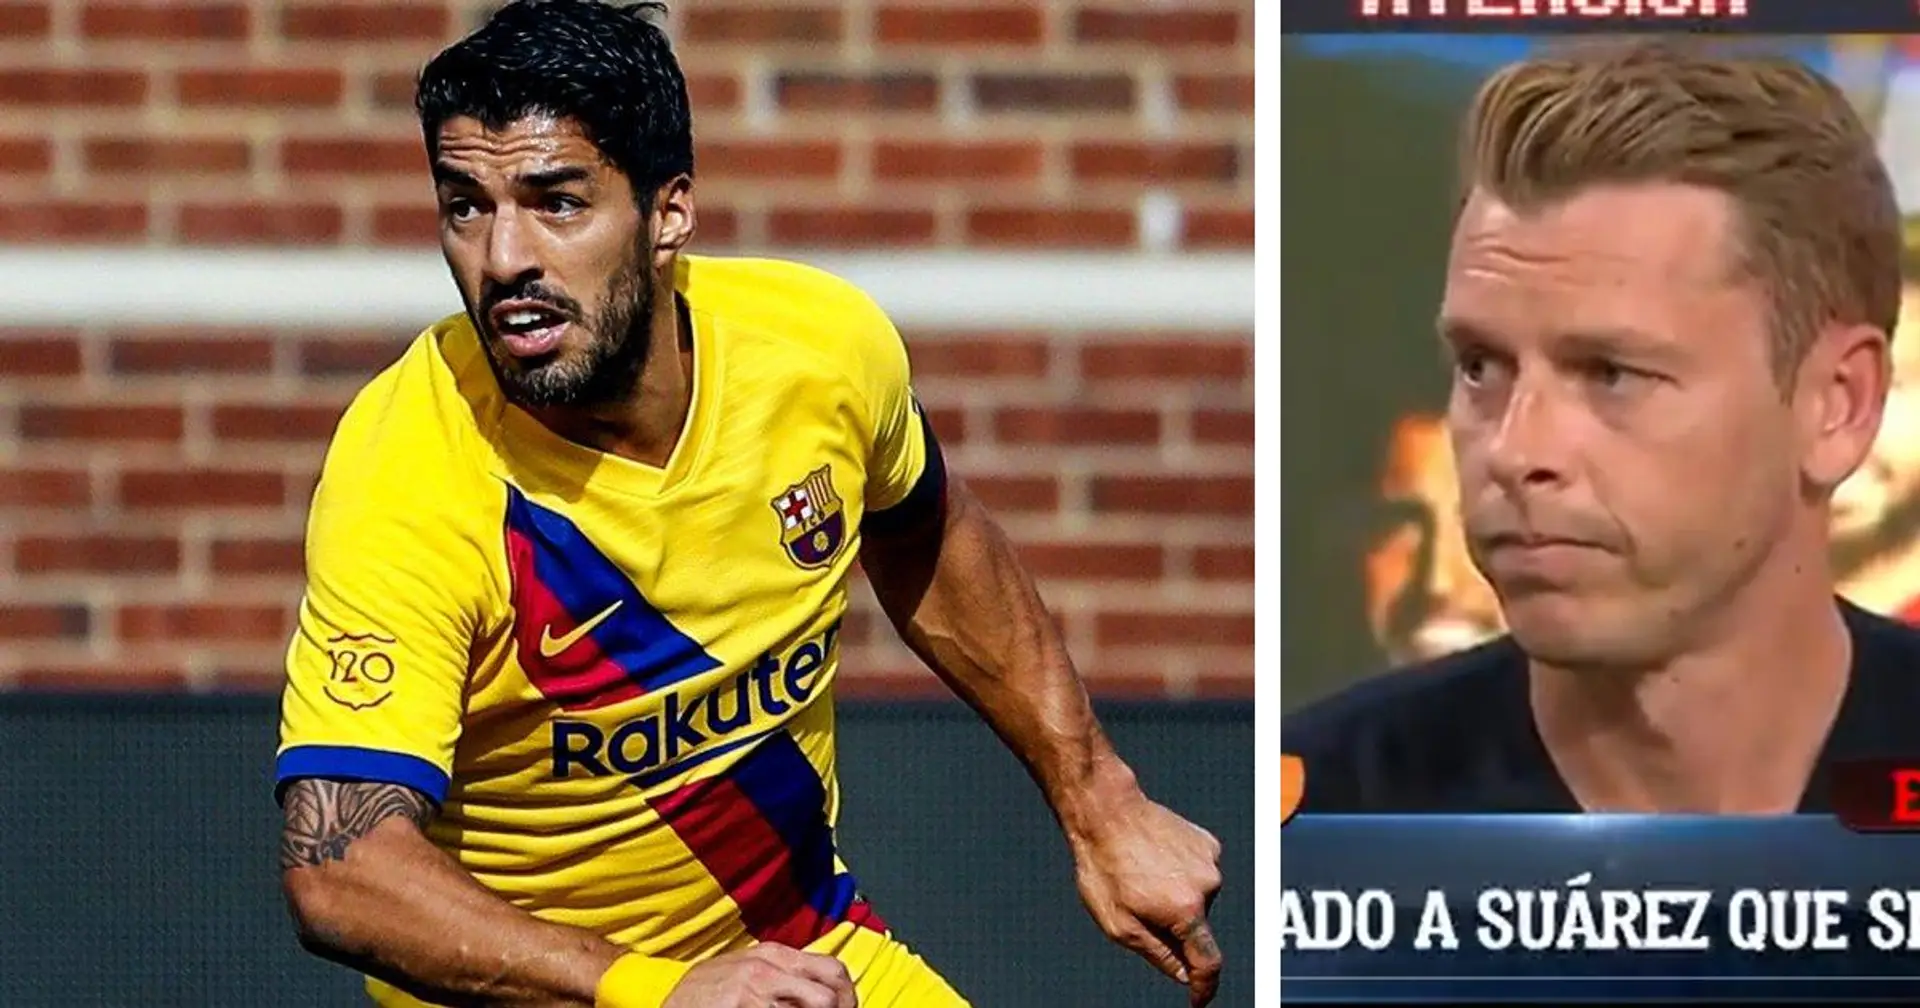 Barca reportedly ask Suarez to leave this summer - Madrid-based media